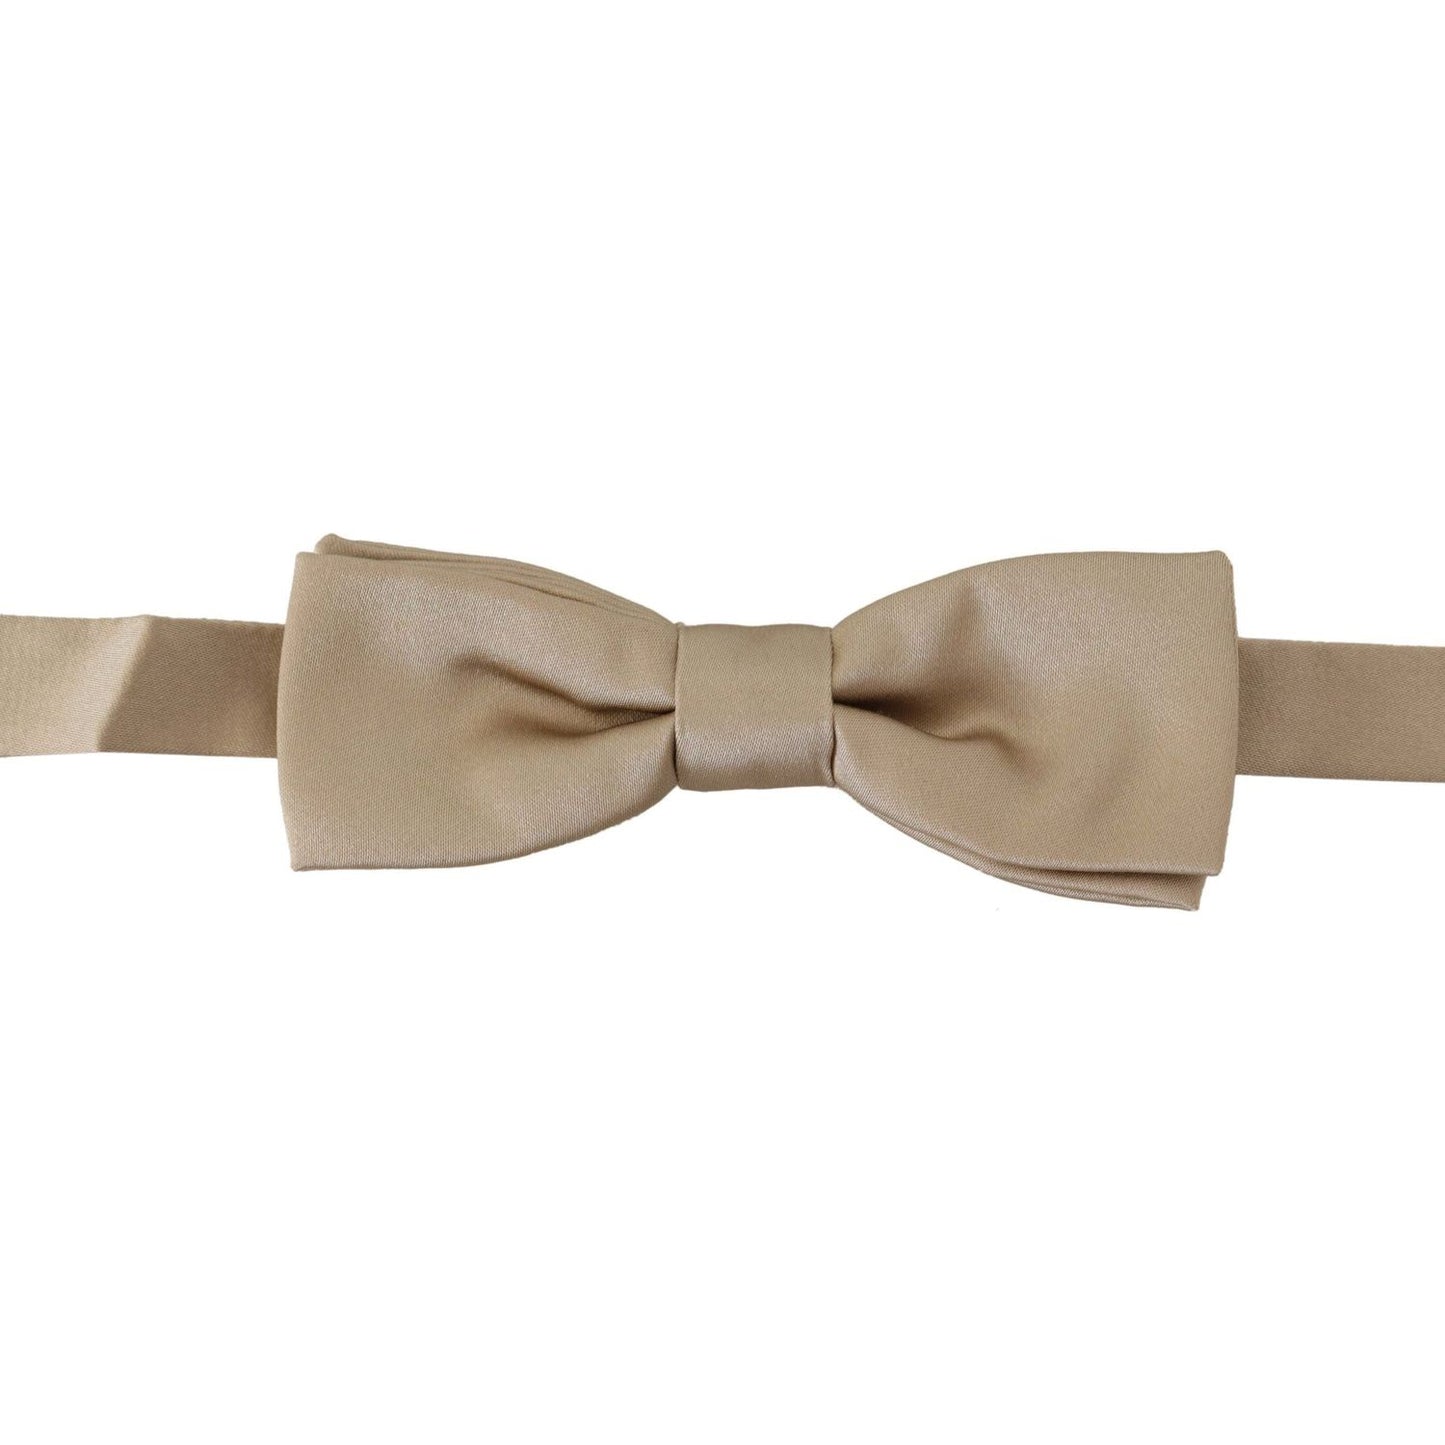 Dolce & Gabbana Dazzling Gold Silk Bow Tie gold-solid-100-silk-adjustable-neck-papillon-tie IMG_7478-scaled-00c2d34e-6b6.jpg